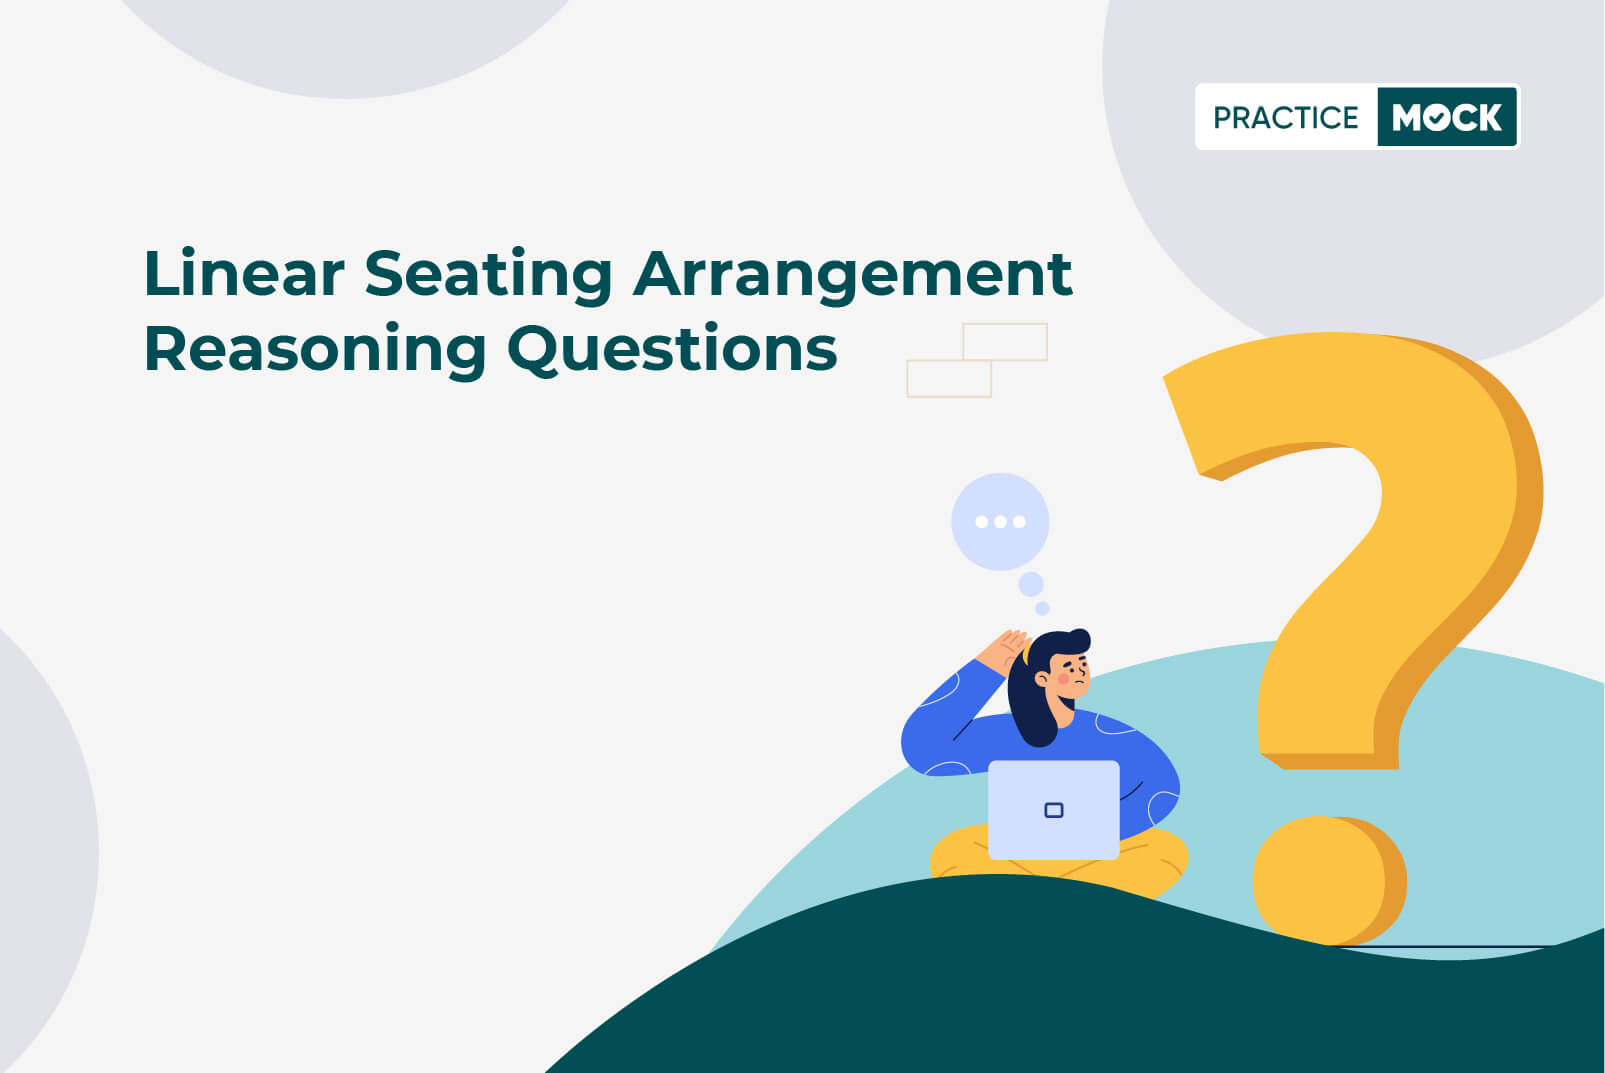 Linear Seating Arrangement Reasoning Questions